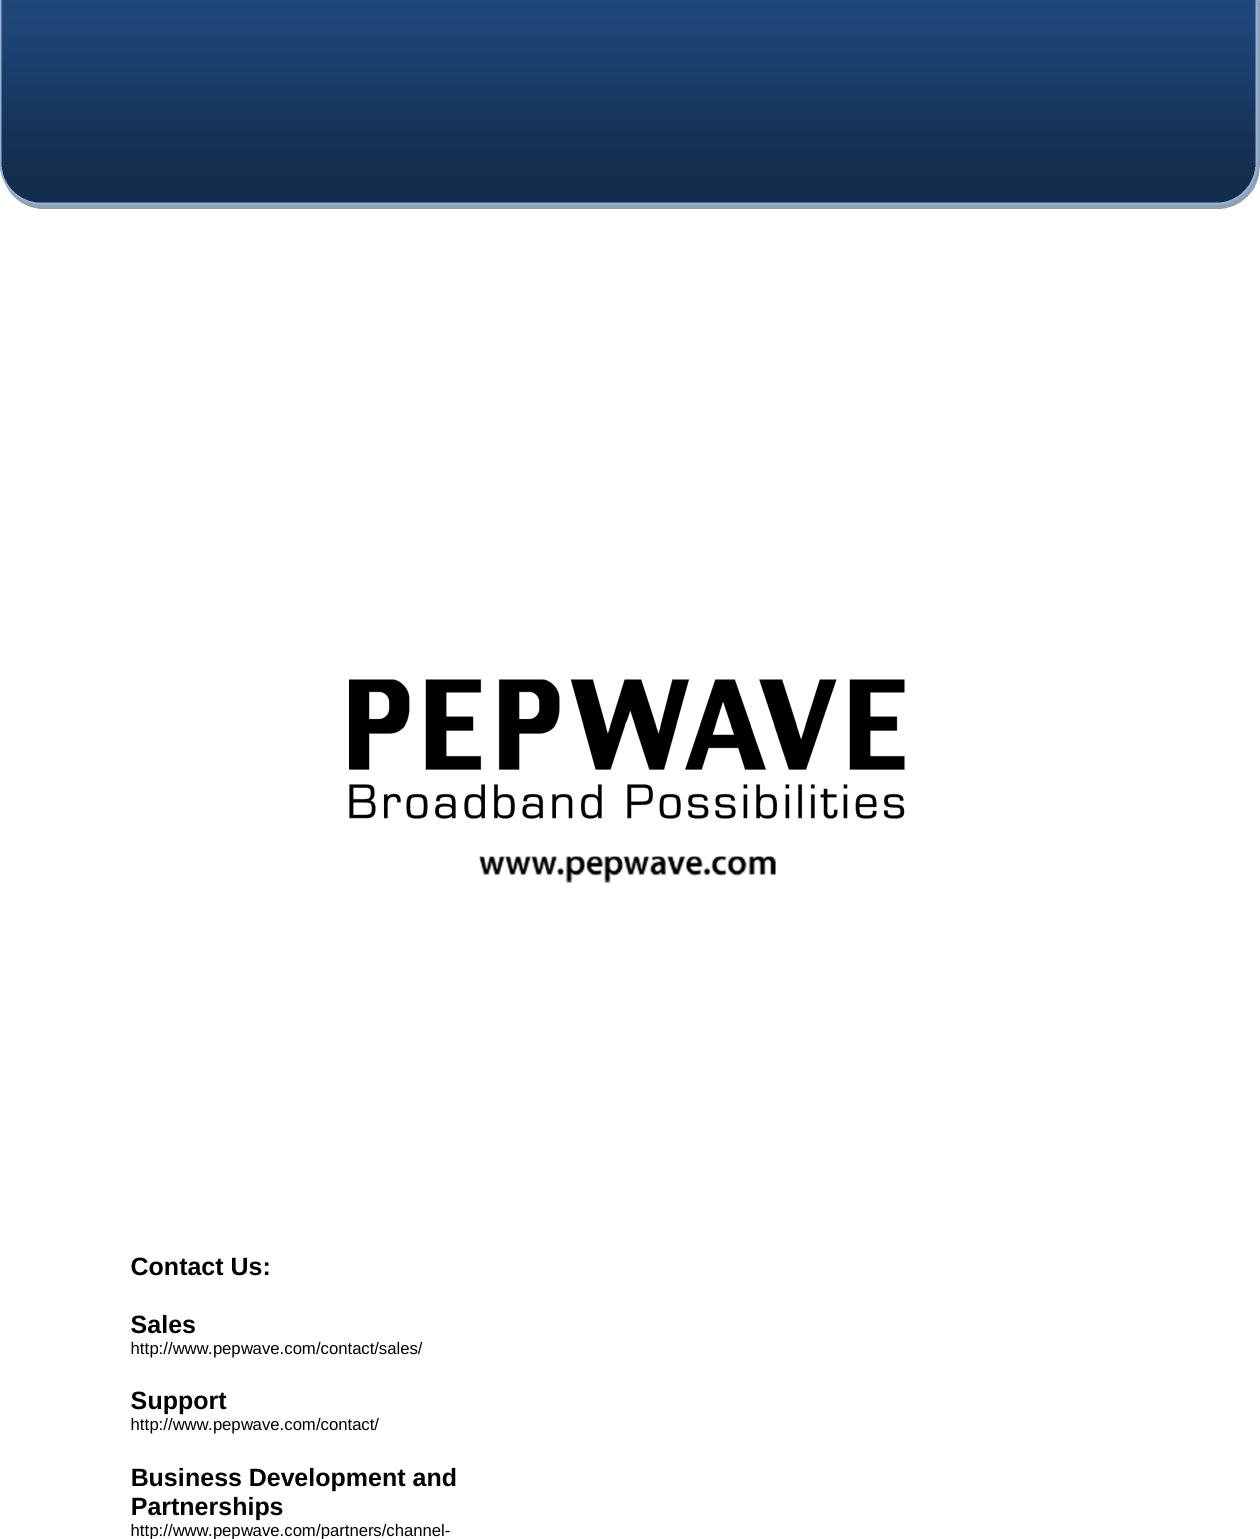    Contact Us:  Sales http://www.pepwave.com/contact/sales/  Support http://www.pepwave.com/contact/  Business Development and Partnerships http://www.pepwave.com/partners/channel- 